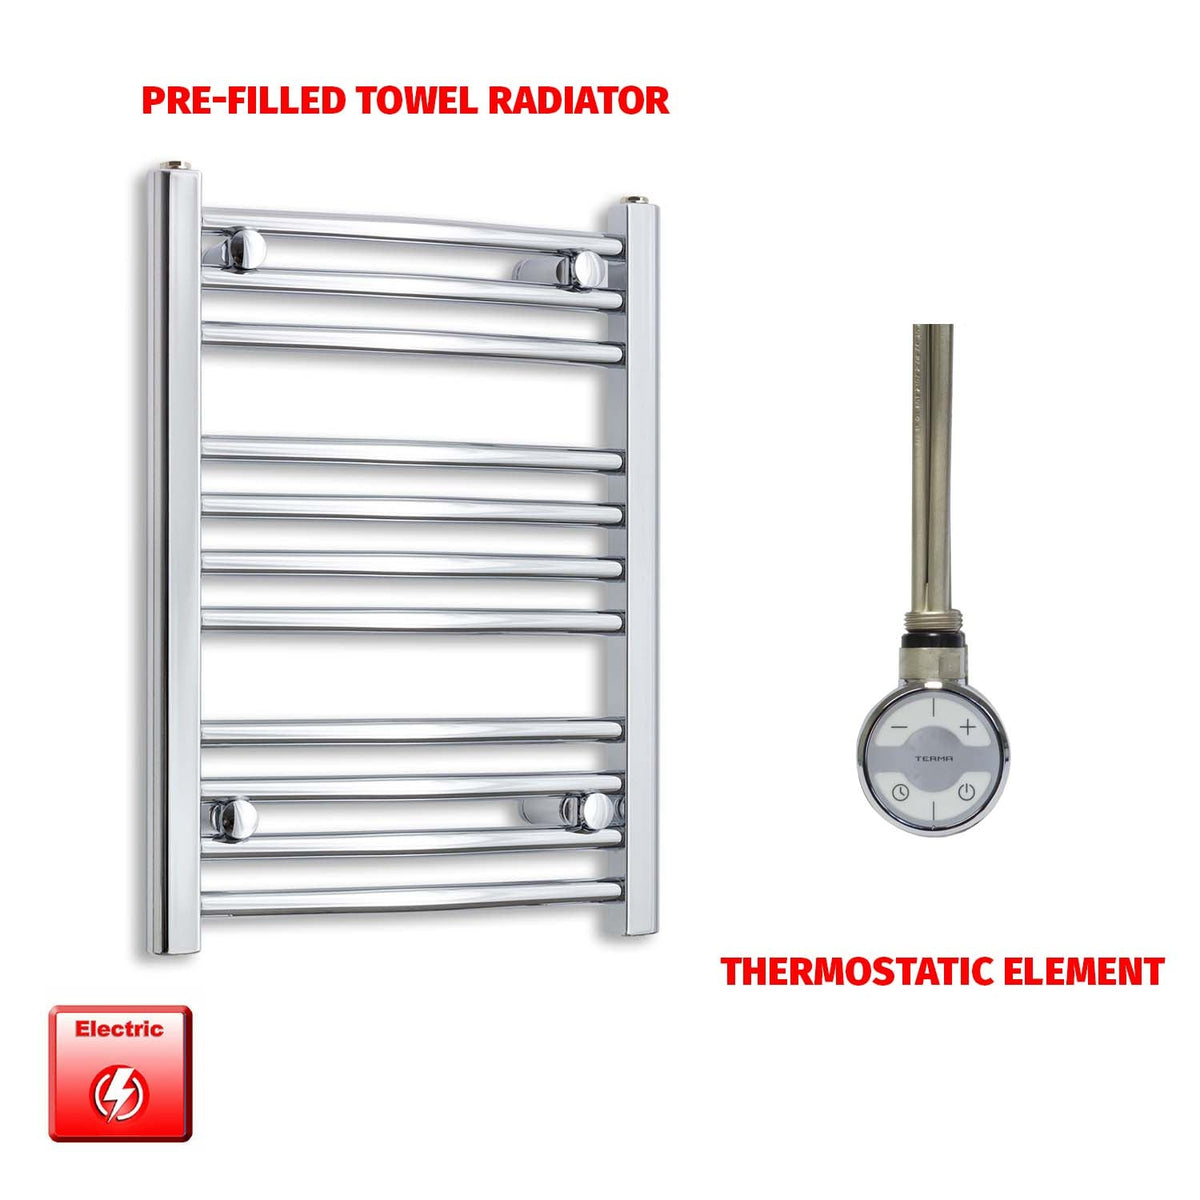 600mm High 400mm Wide Pre-Filled Electric Heated Towel Radiator Straight Chrome MOA Thermostatic element no timer